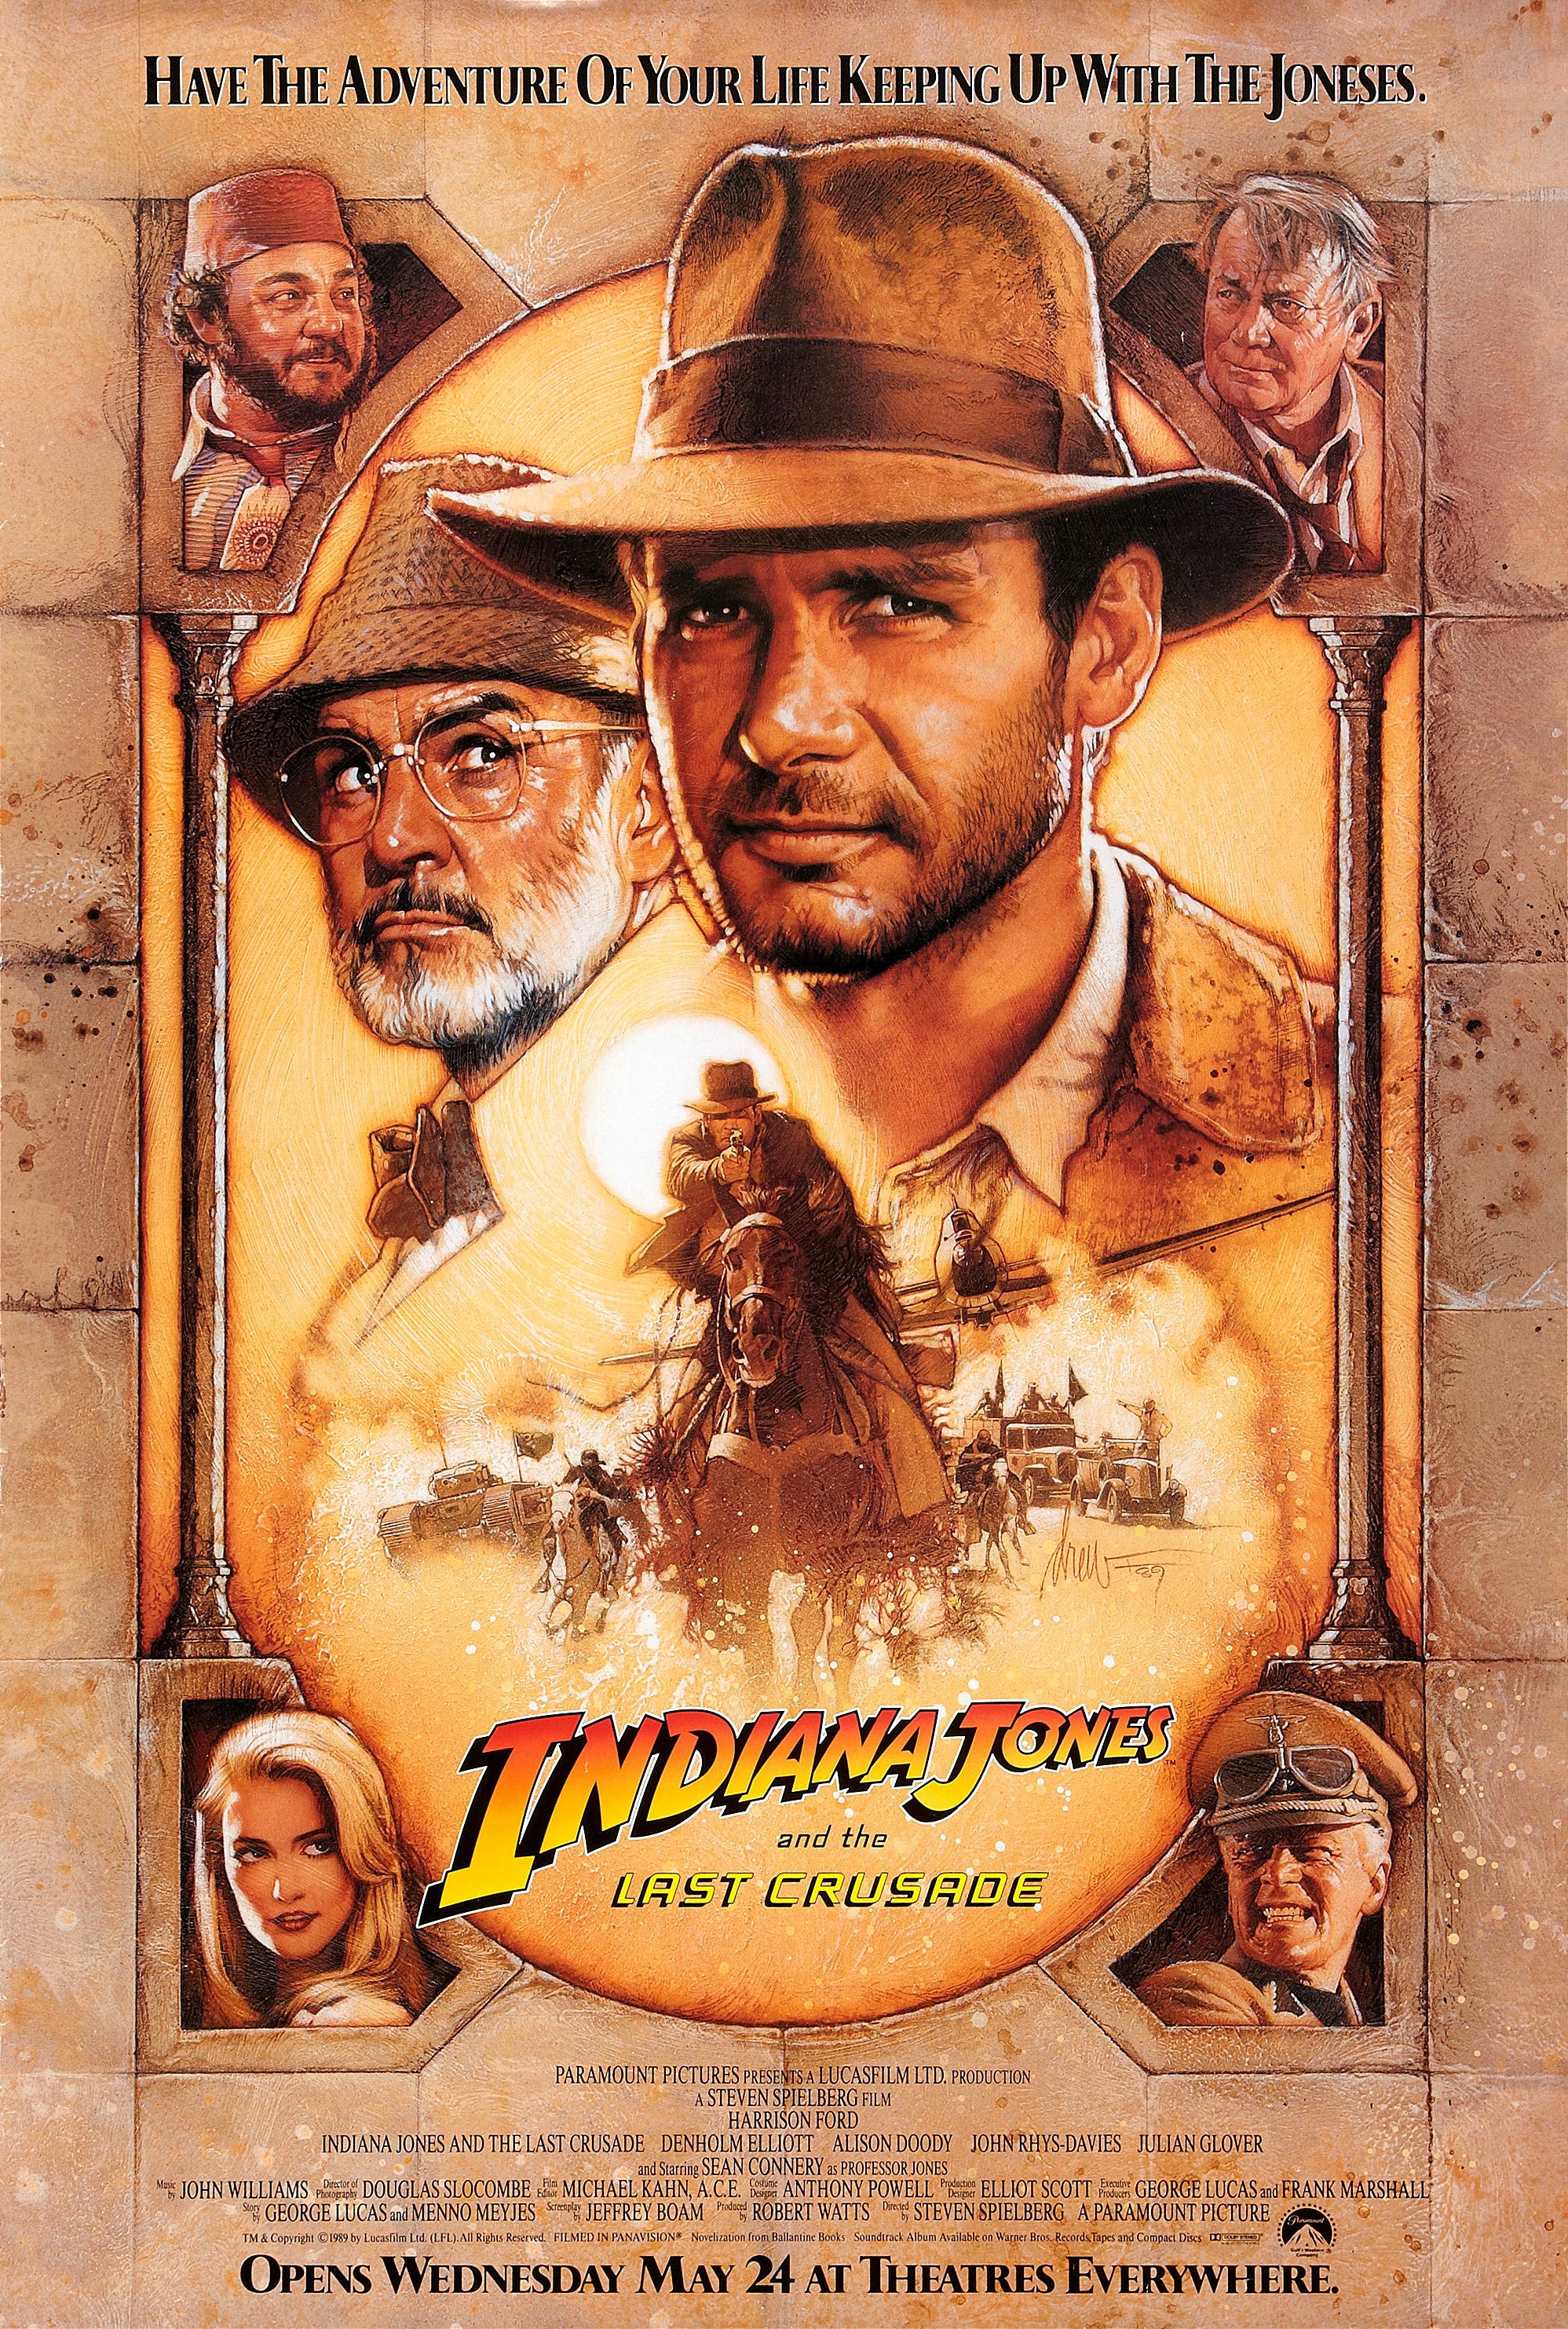 indiana jones and the last crusade - Have The Adventure Of Your Li Kup Up With The Joneses. Tidiana Jone Last Crusade No Tall Ino Na Opens Wednesday May 21 At Theatres Everywhere